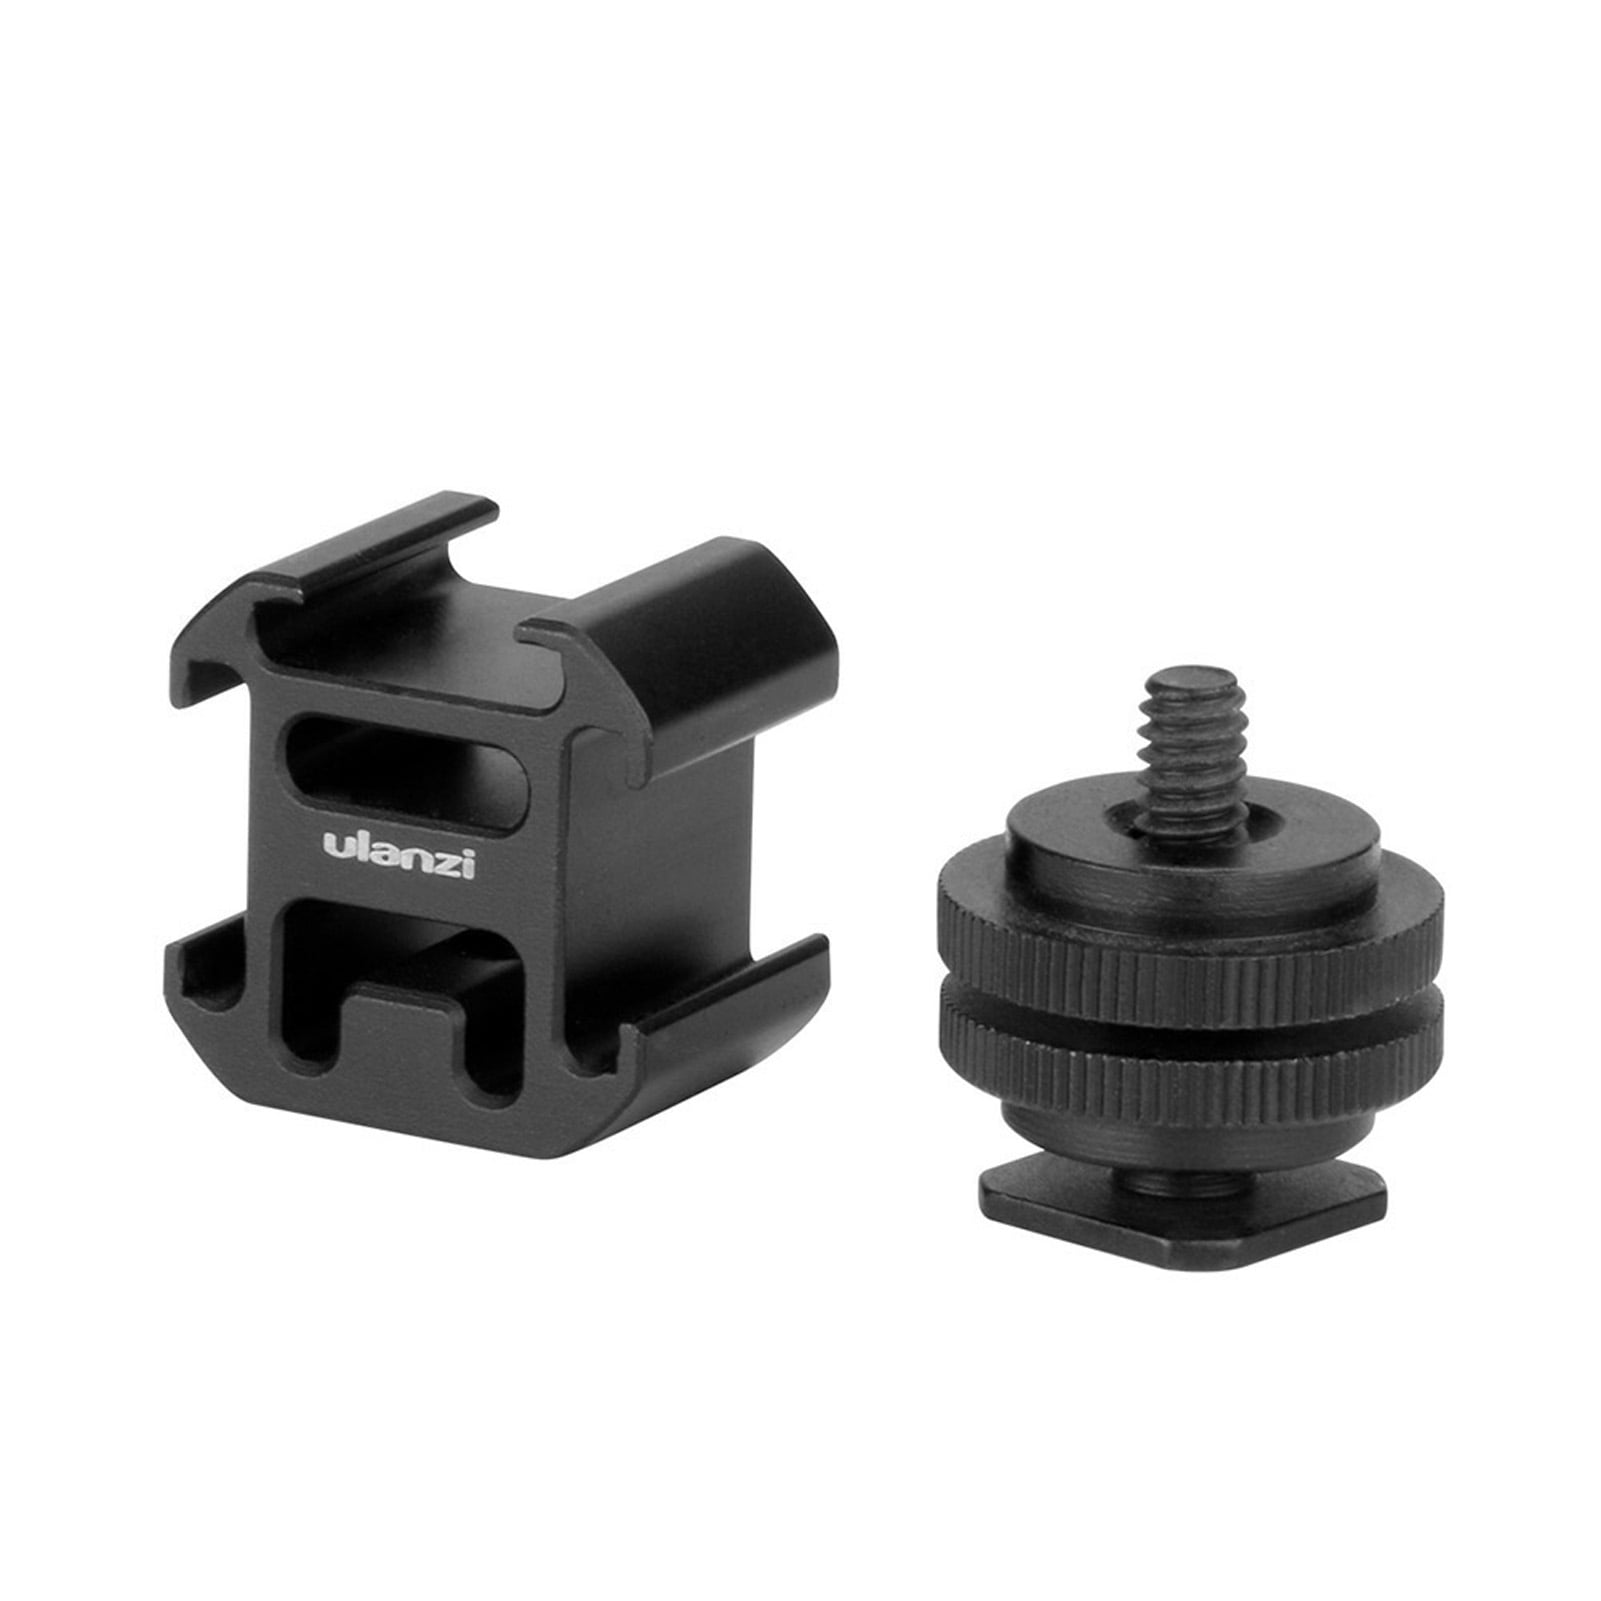 Ulanzi PT-3S 3 Cold Shoe Camera Mount Adapter Extend Port For Canon Monitor T0U6 